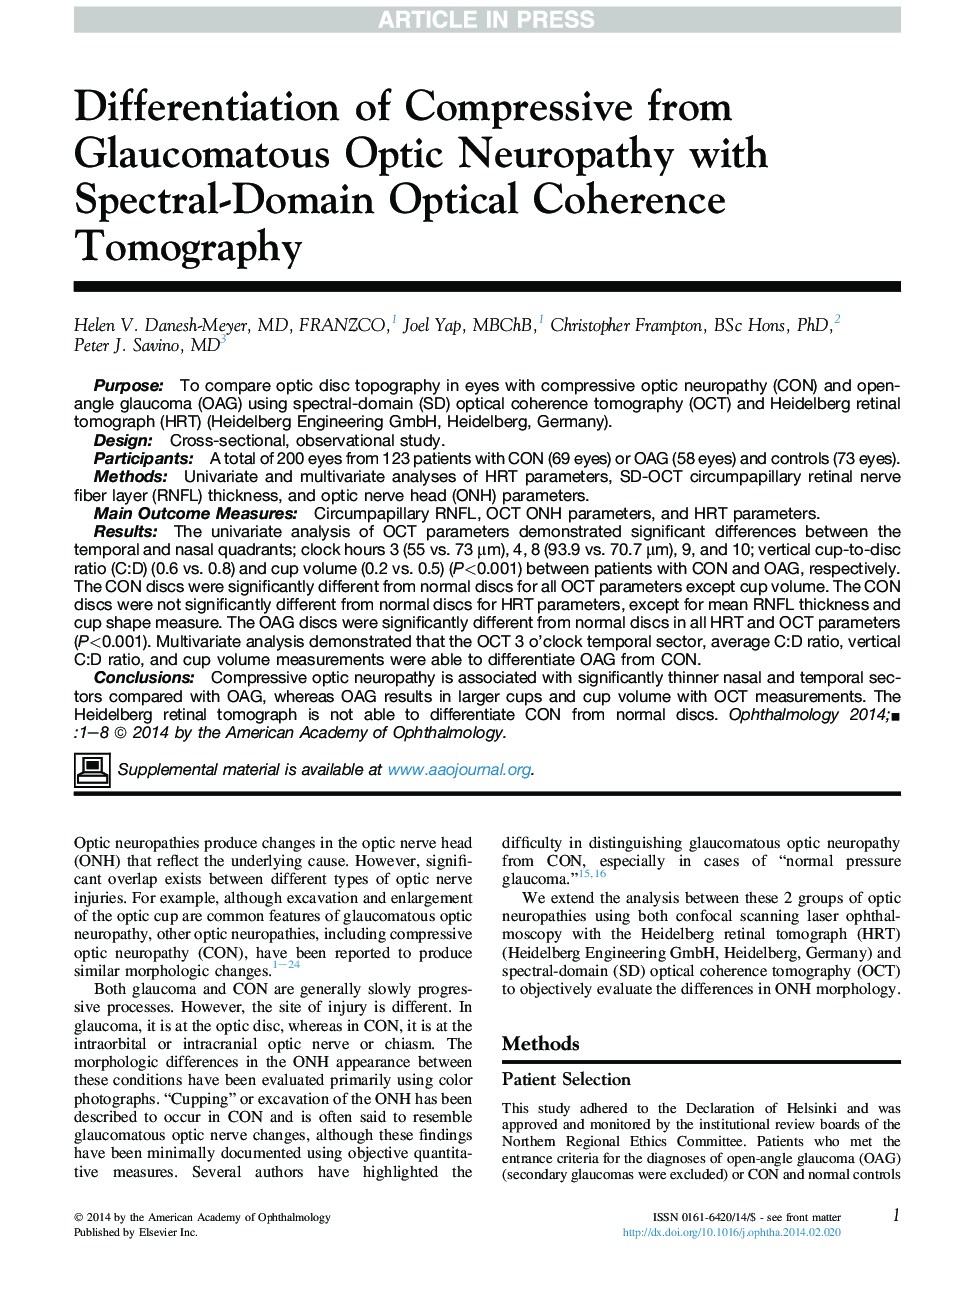 Differentiation of Compressive from Glaucomatous Optic Neuropathy with Spectral-Domain Optical Coherence Tomography